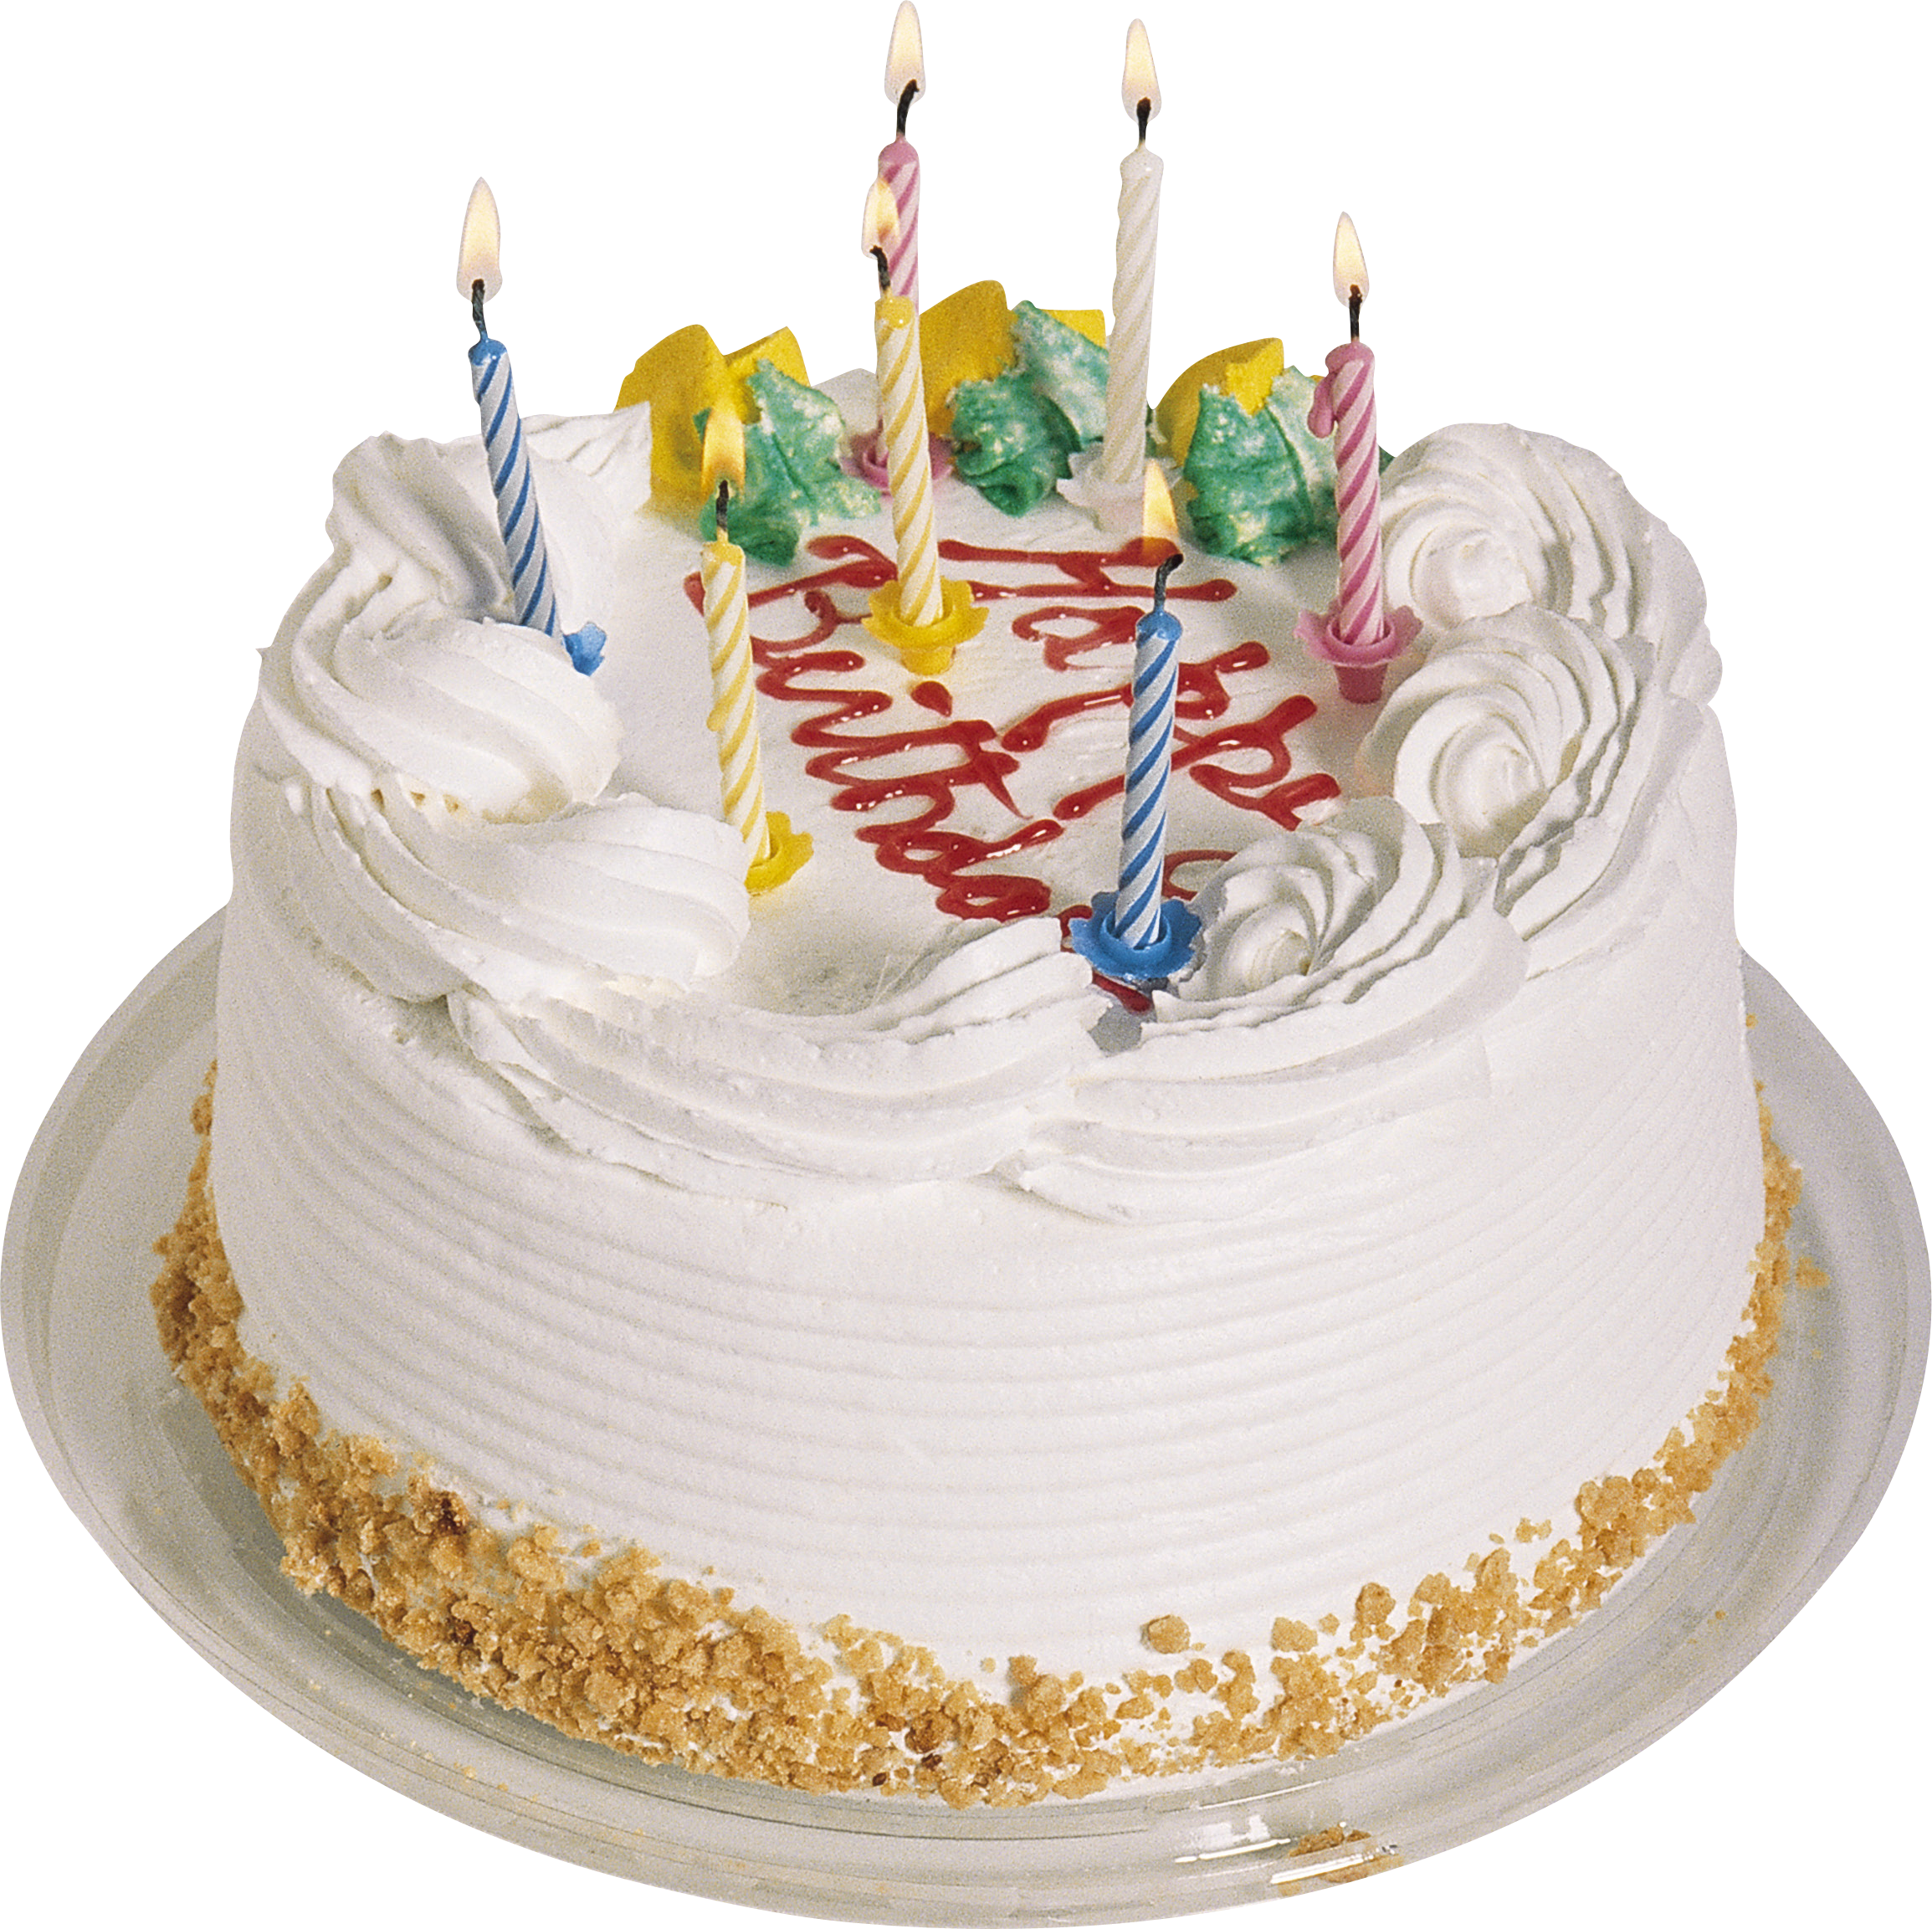 Birthday Cake Png Clip Art - Birthday Cake Transparent Background - Free Transparent  PNG Clipart Images Download